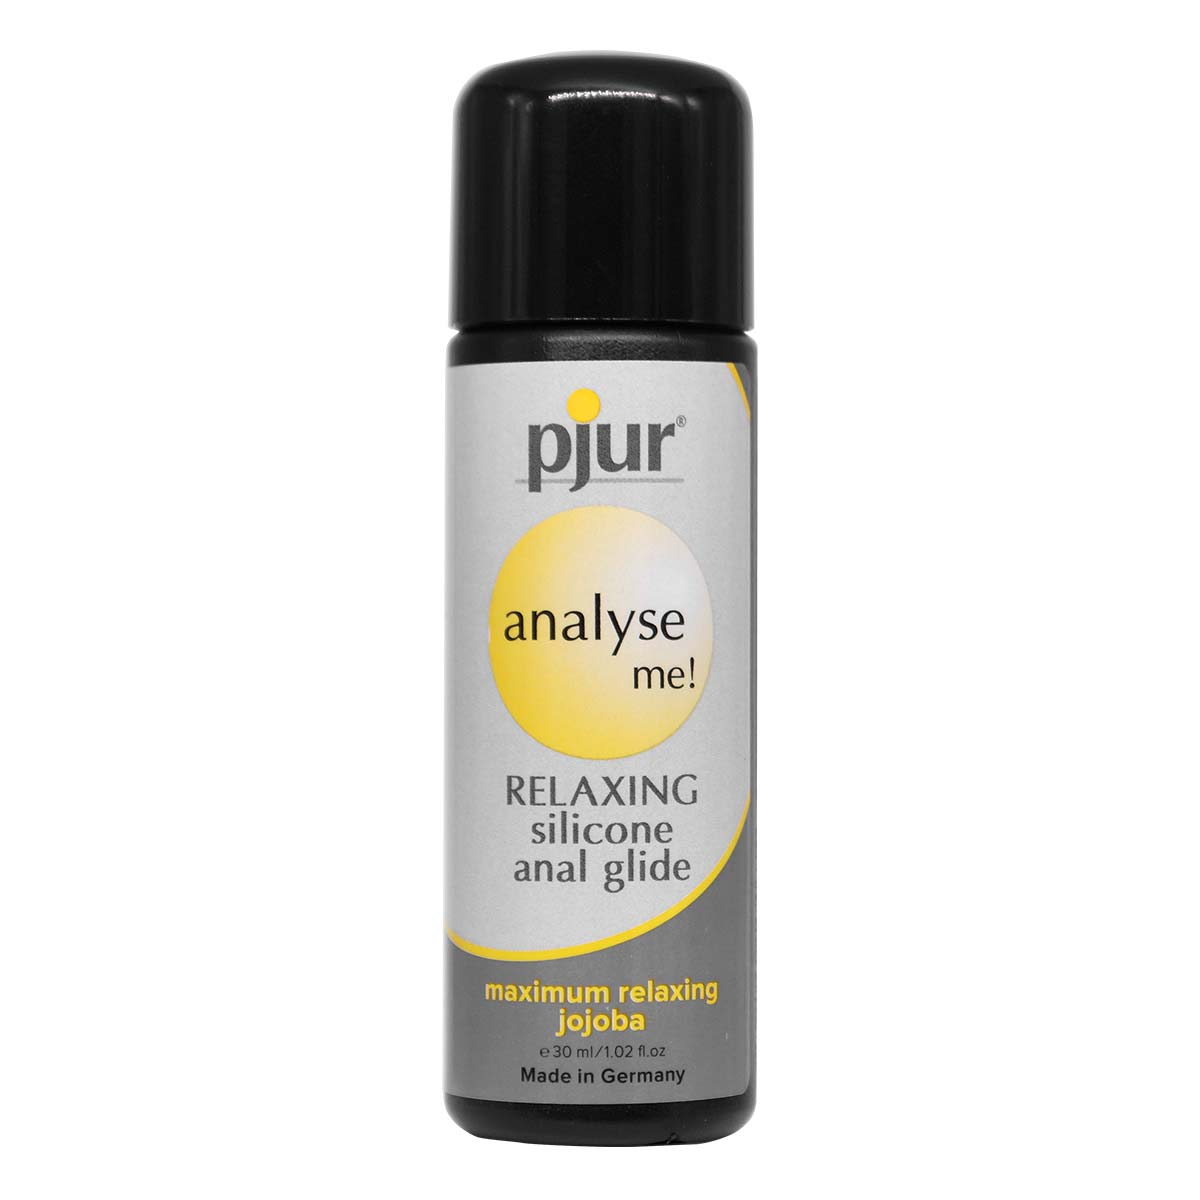 pjur analyse me! RELAXING Silicone Anal Glide 30ml Silicone-based Lubricant-thumb_2